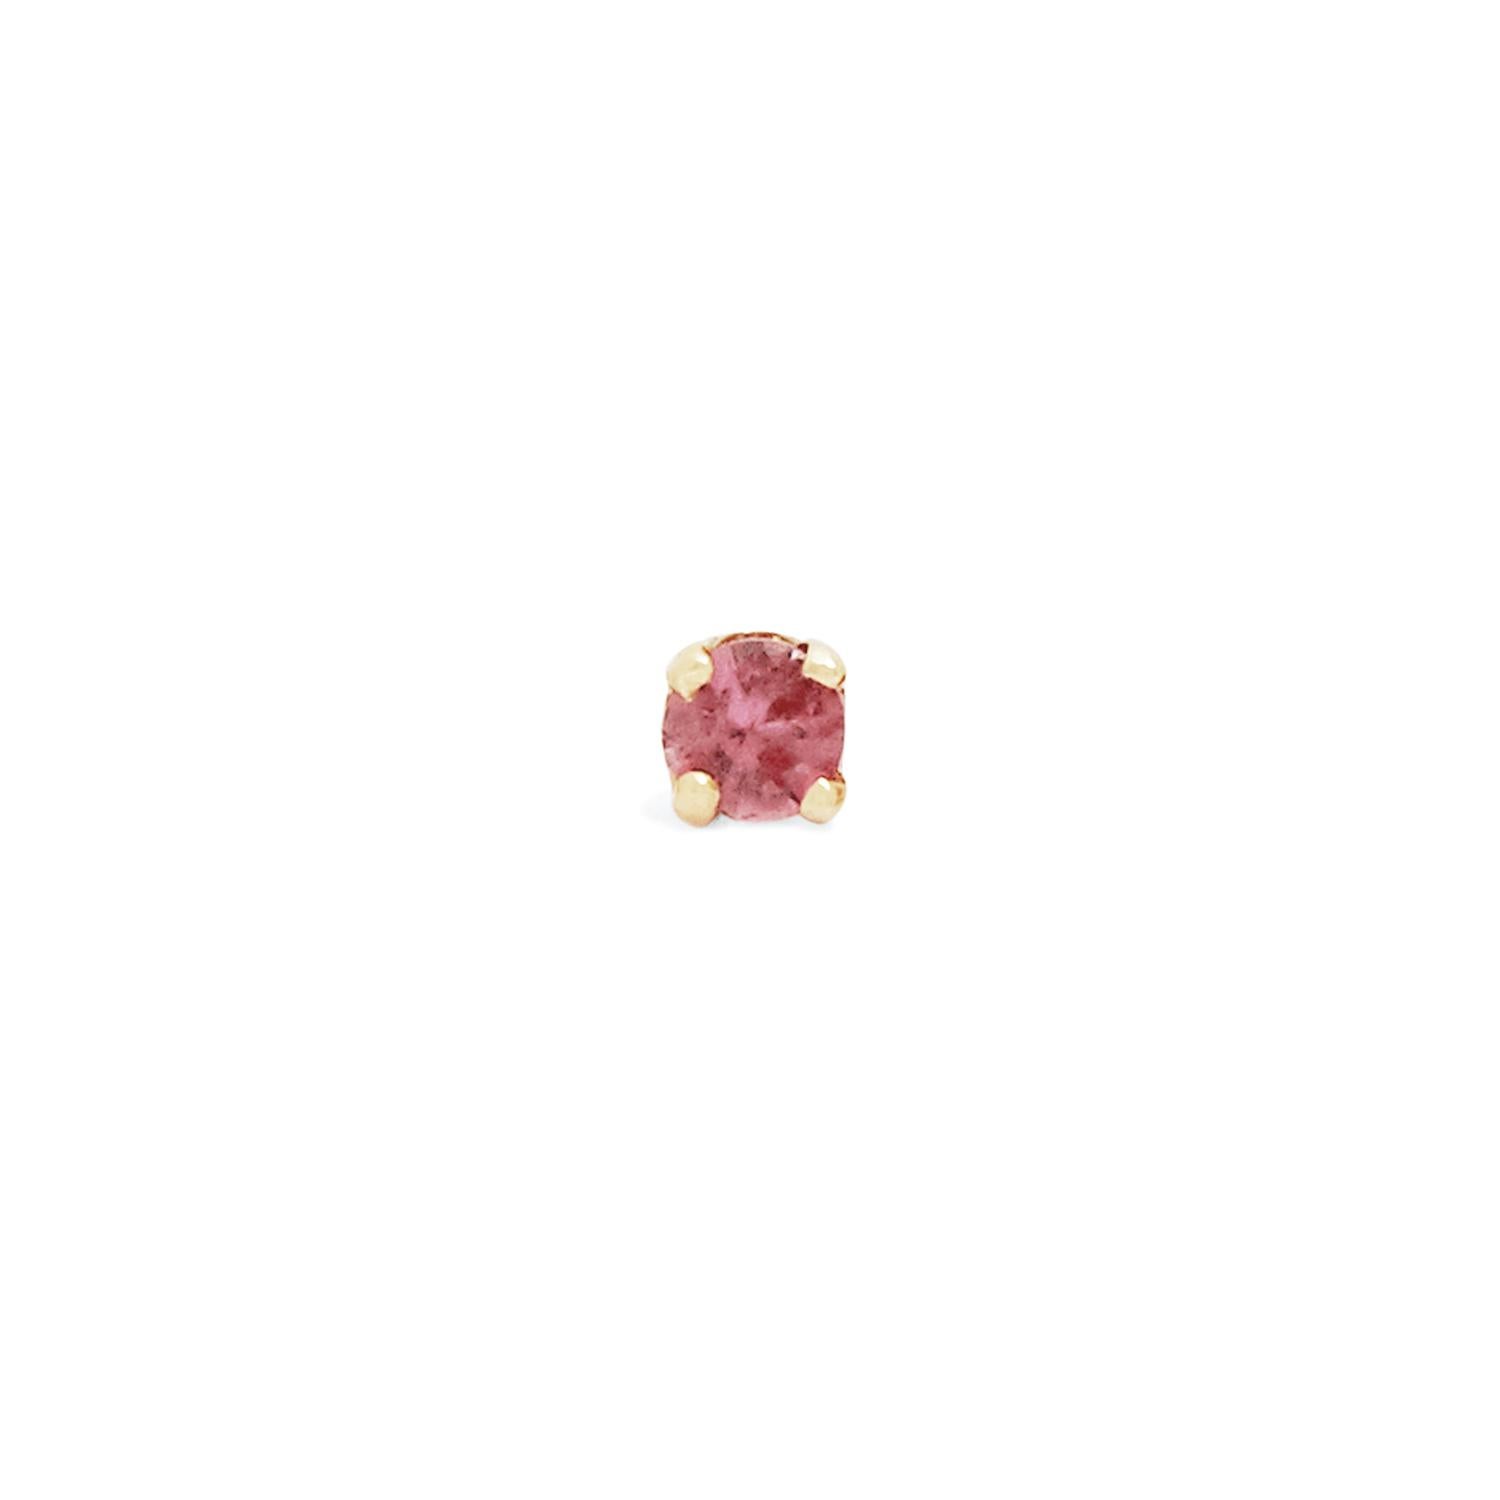 Women's Pair of Tiny Pink Sapphire Studs by Allison Bryan